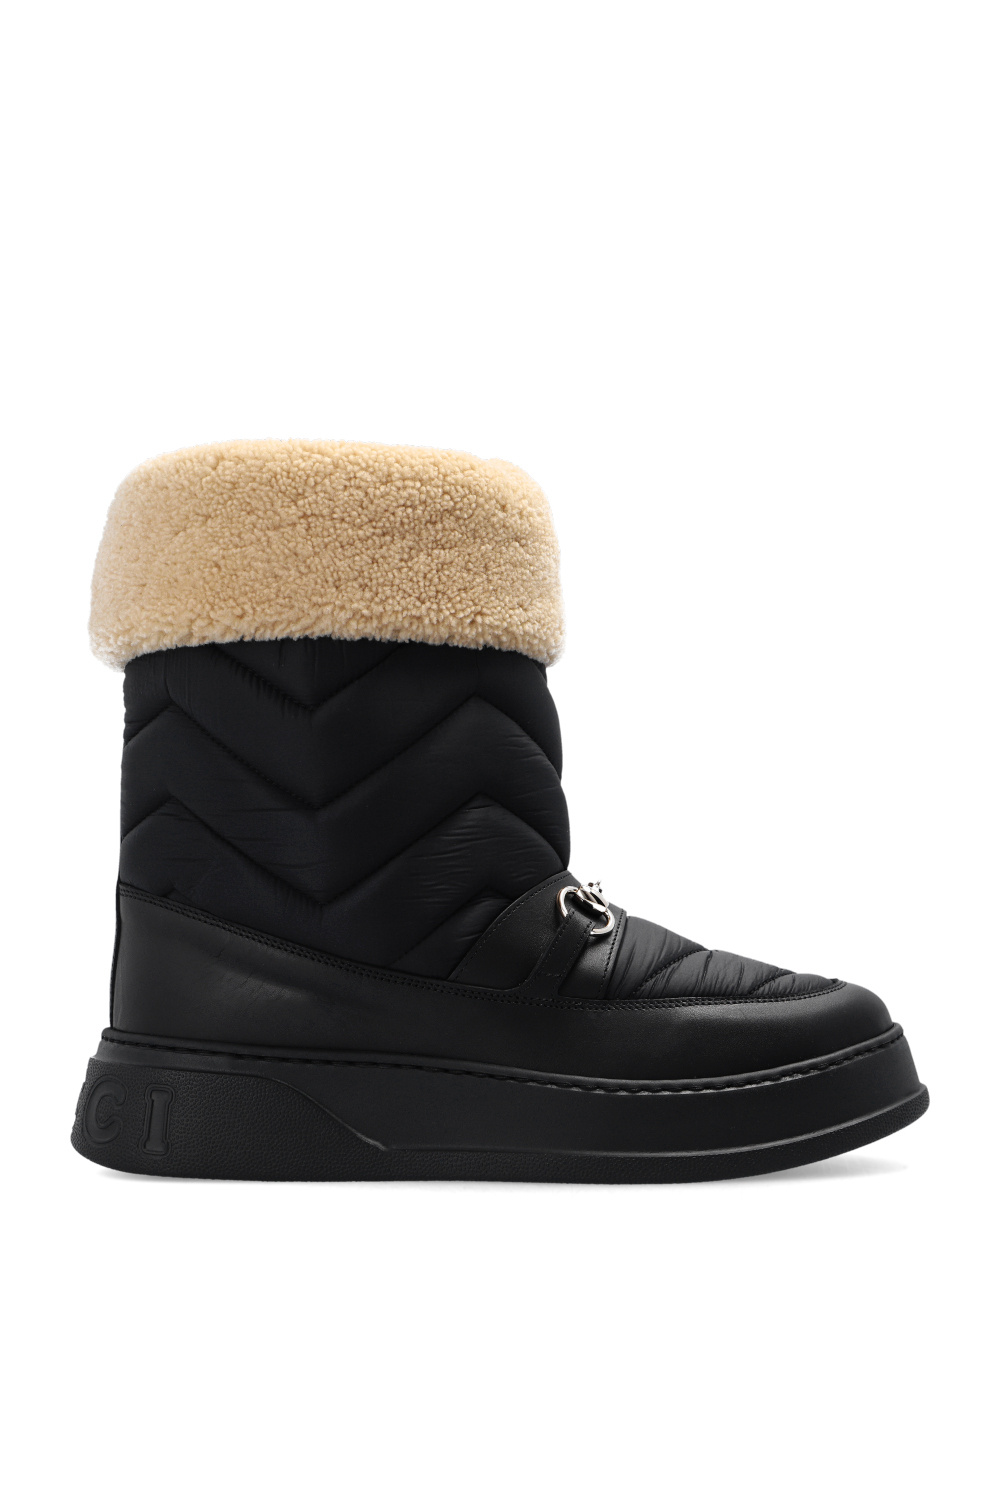 glans Canada Gøre klart Gucci Quilted snow boots | Men's Shoes | Vitkac